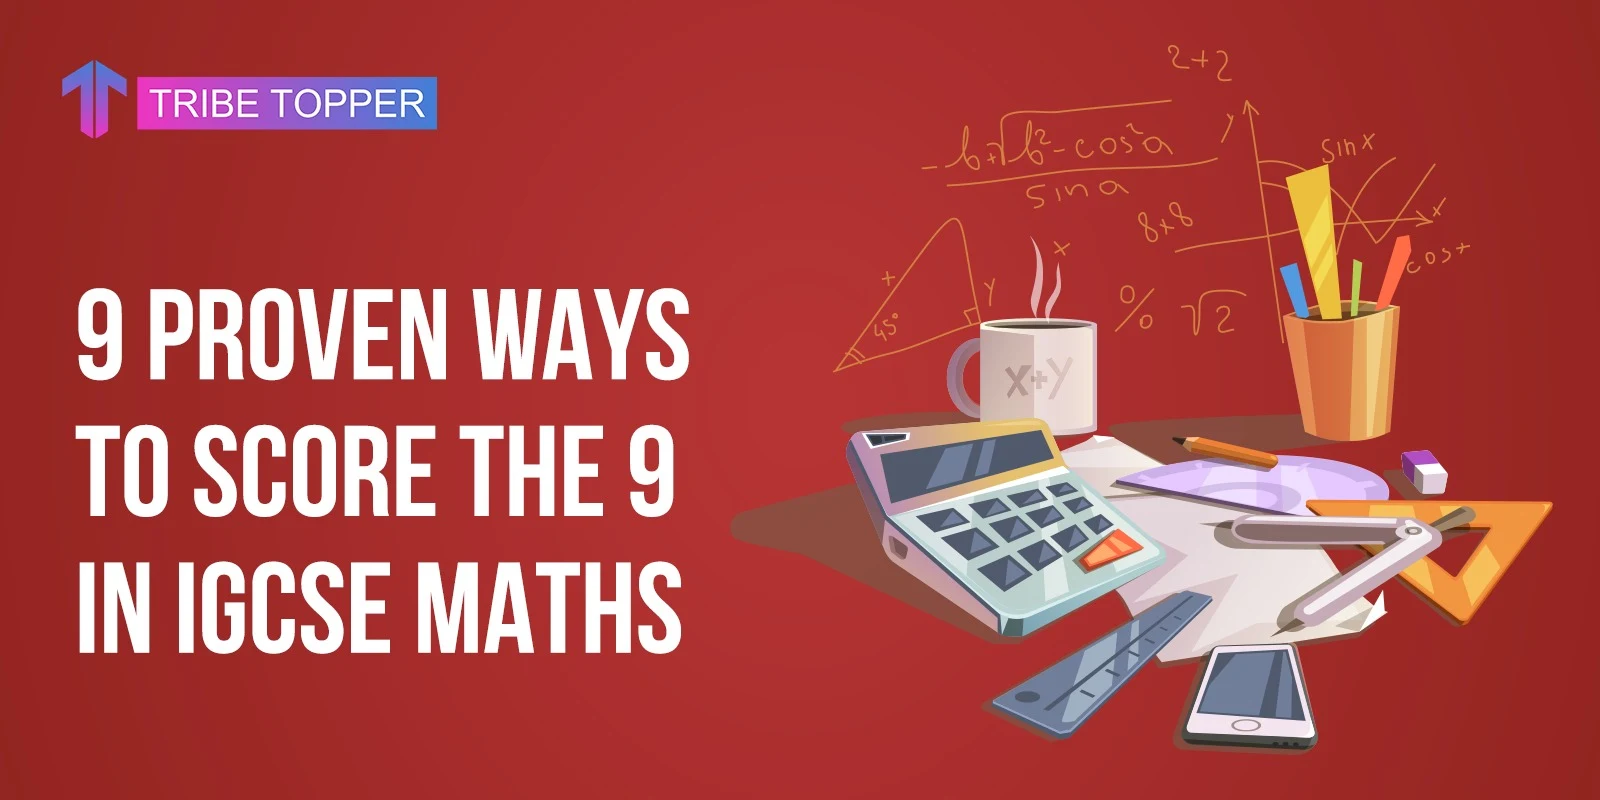 9 proven ways to score the 9 in IGCSE Maths.